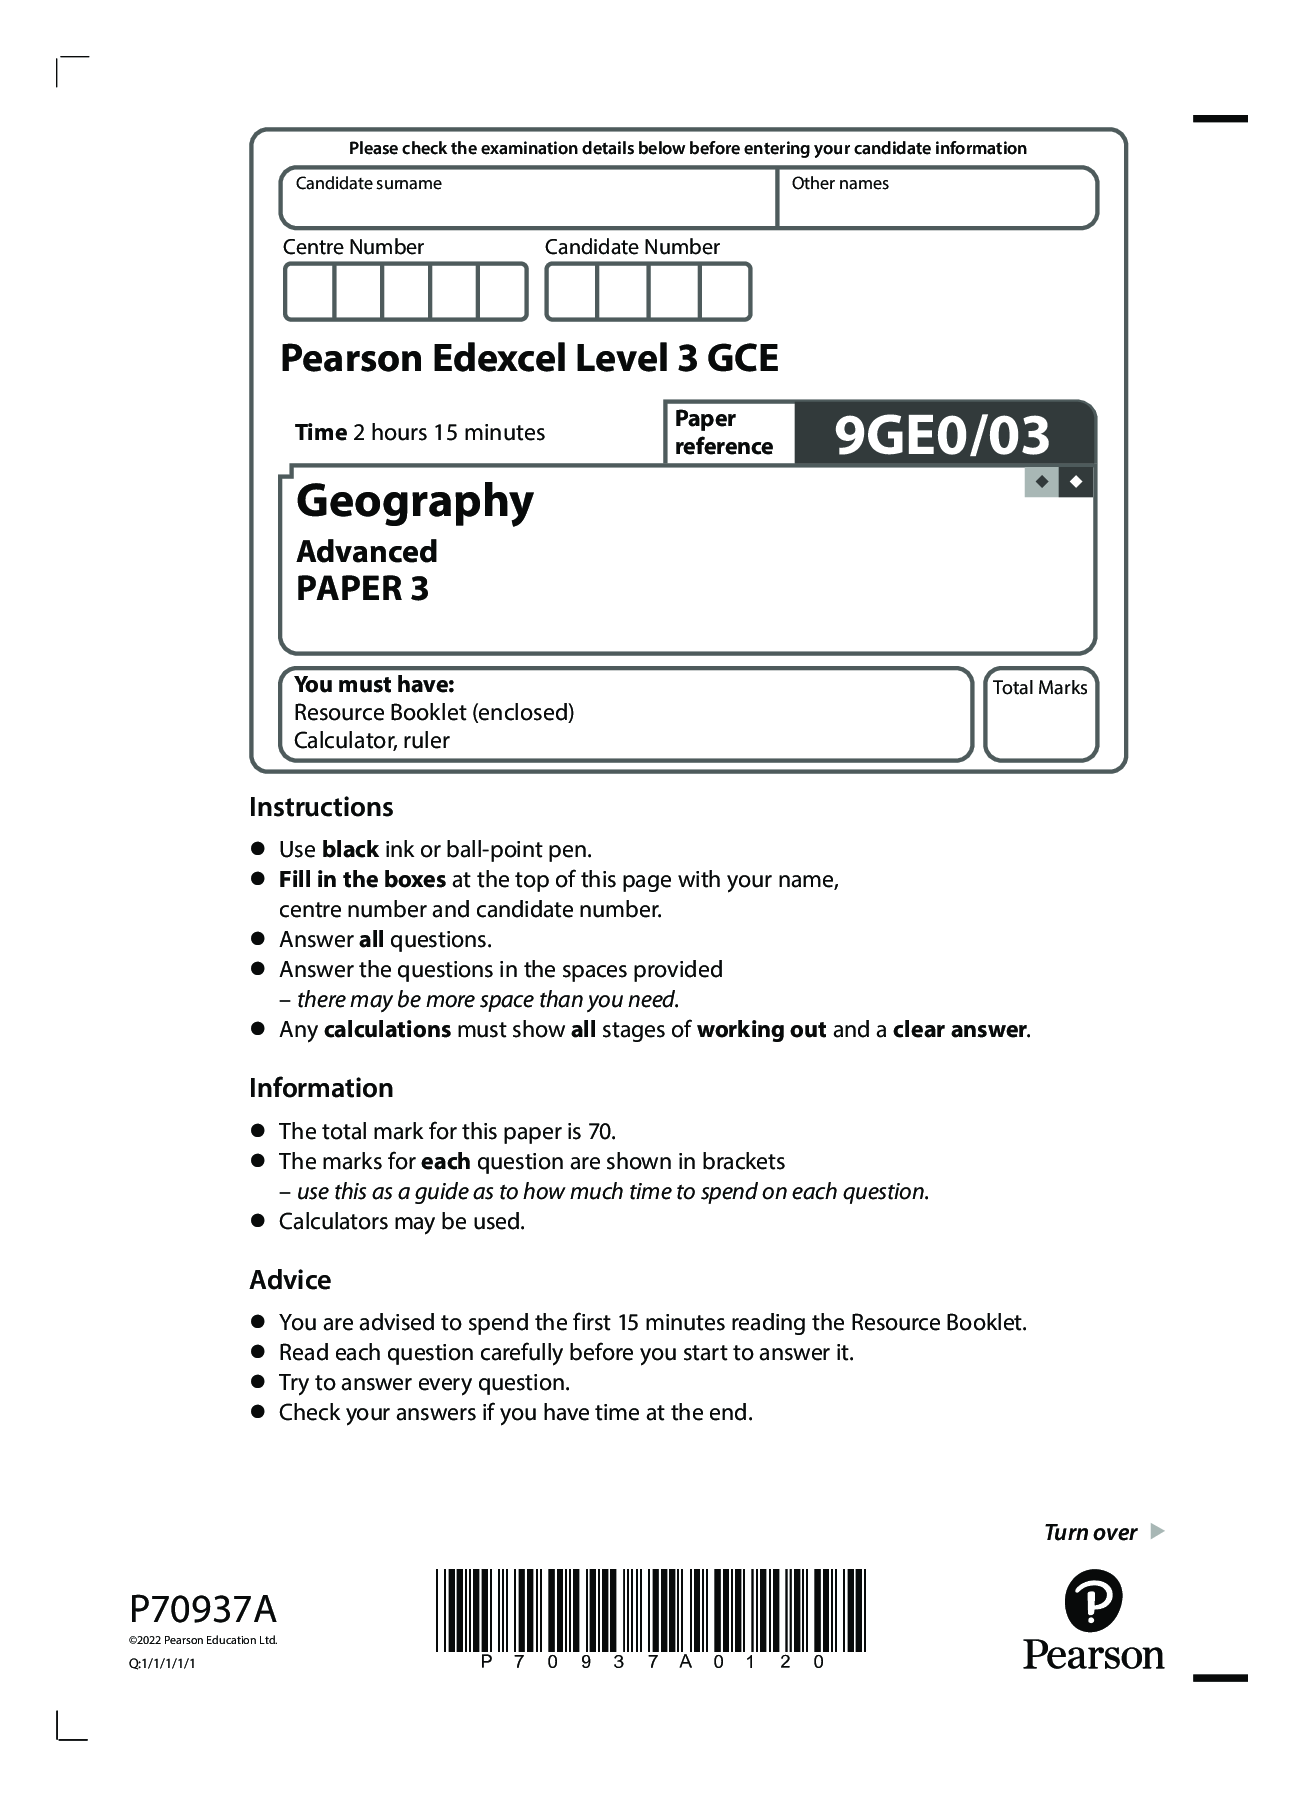 Pearson Edexcel Level 3 GCE 9GE0/03 2022 Geography Advanced PAPER 3